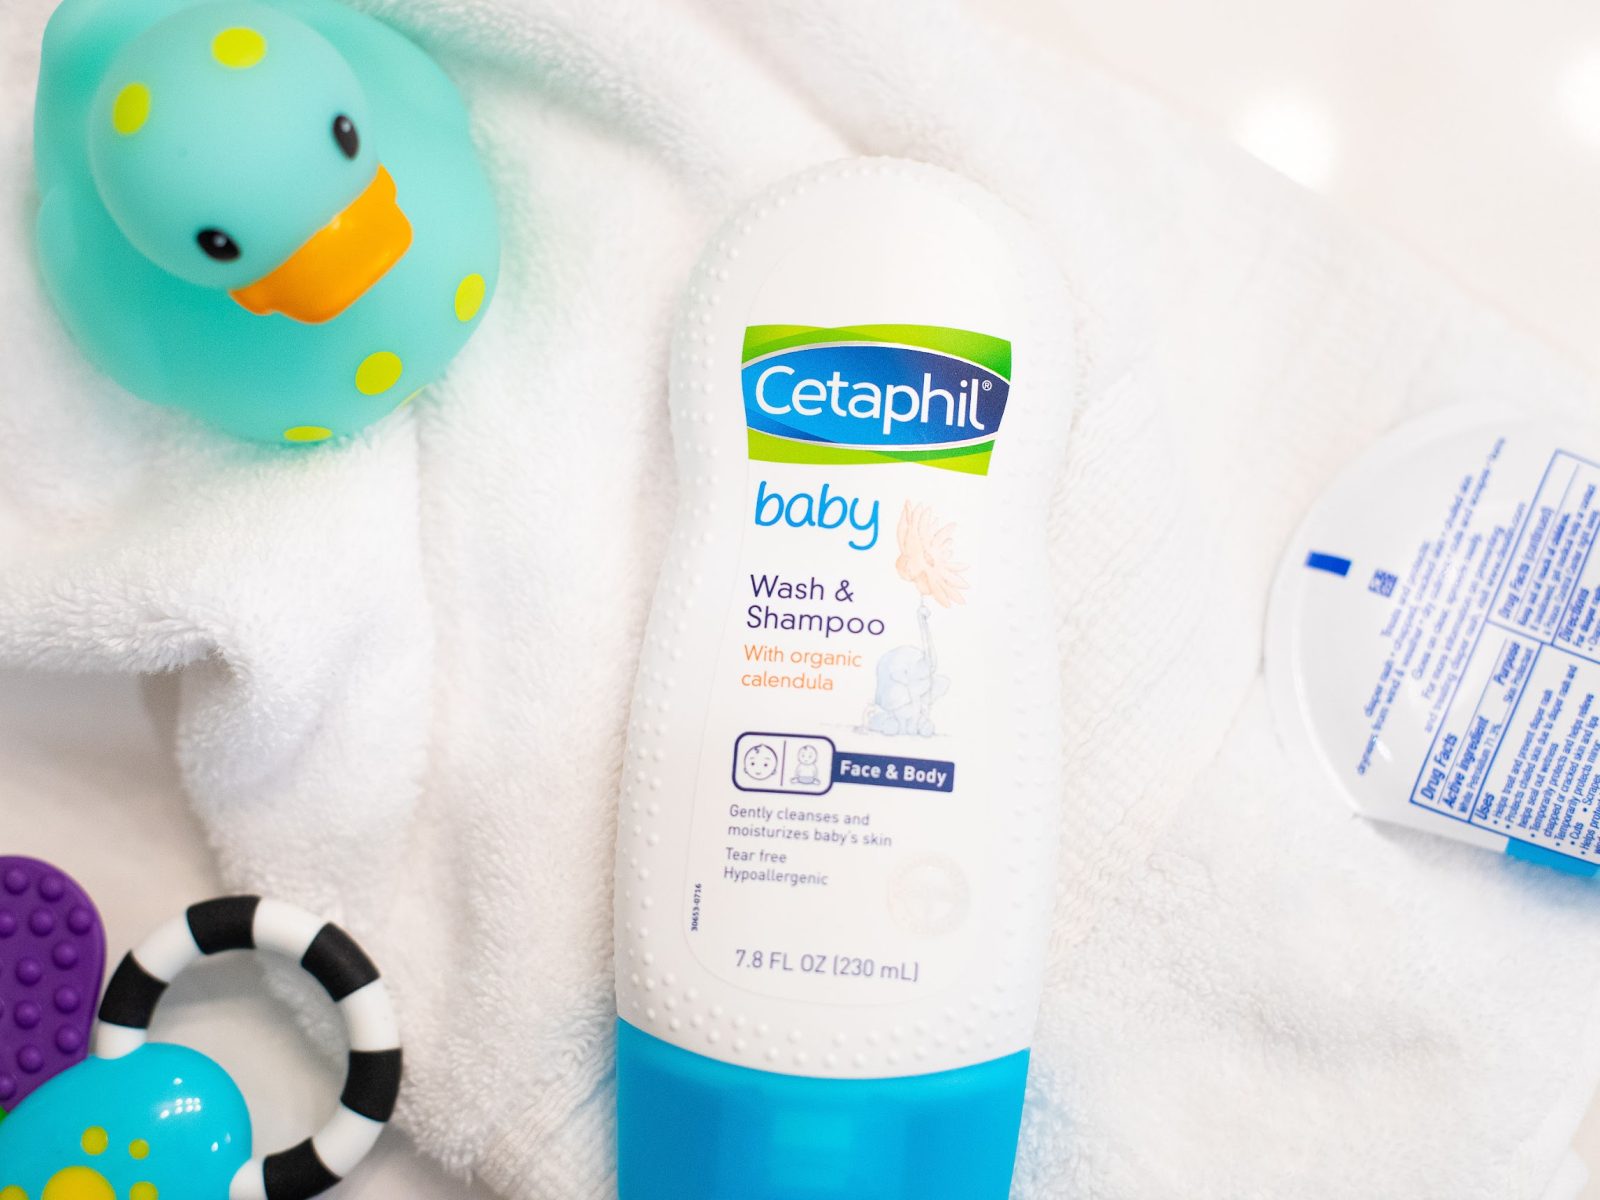 Great Deals On Cetaphil Products This Week At Publix